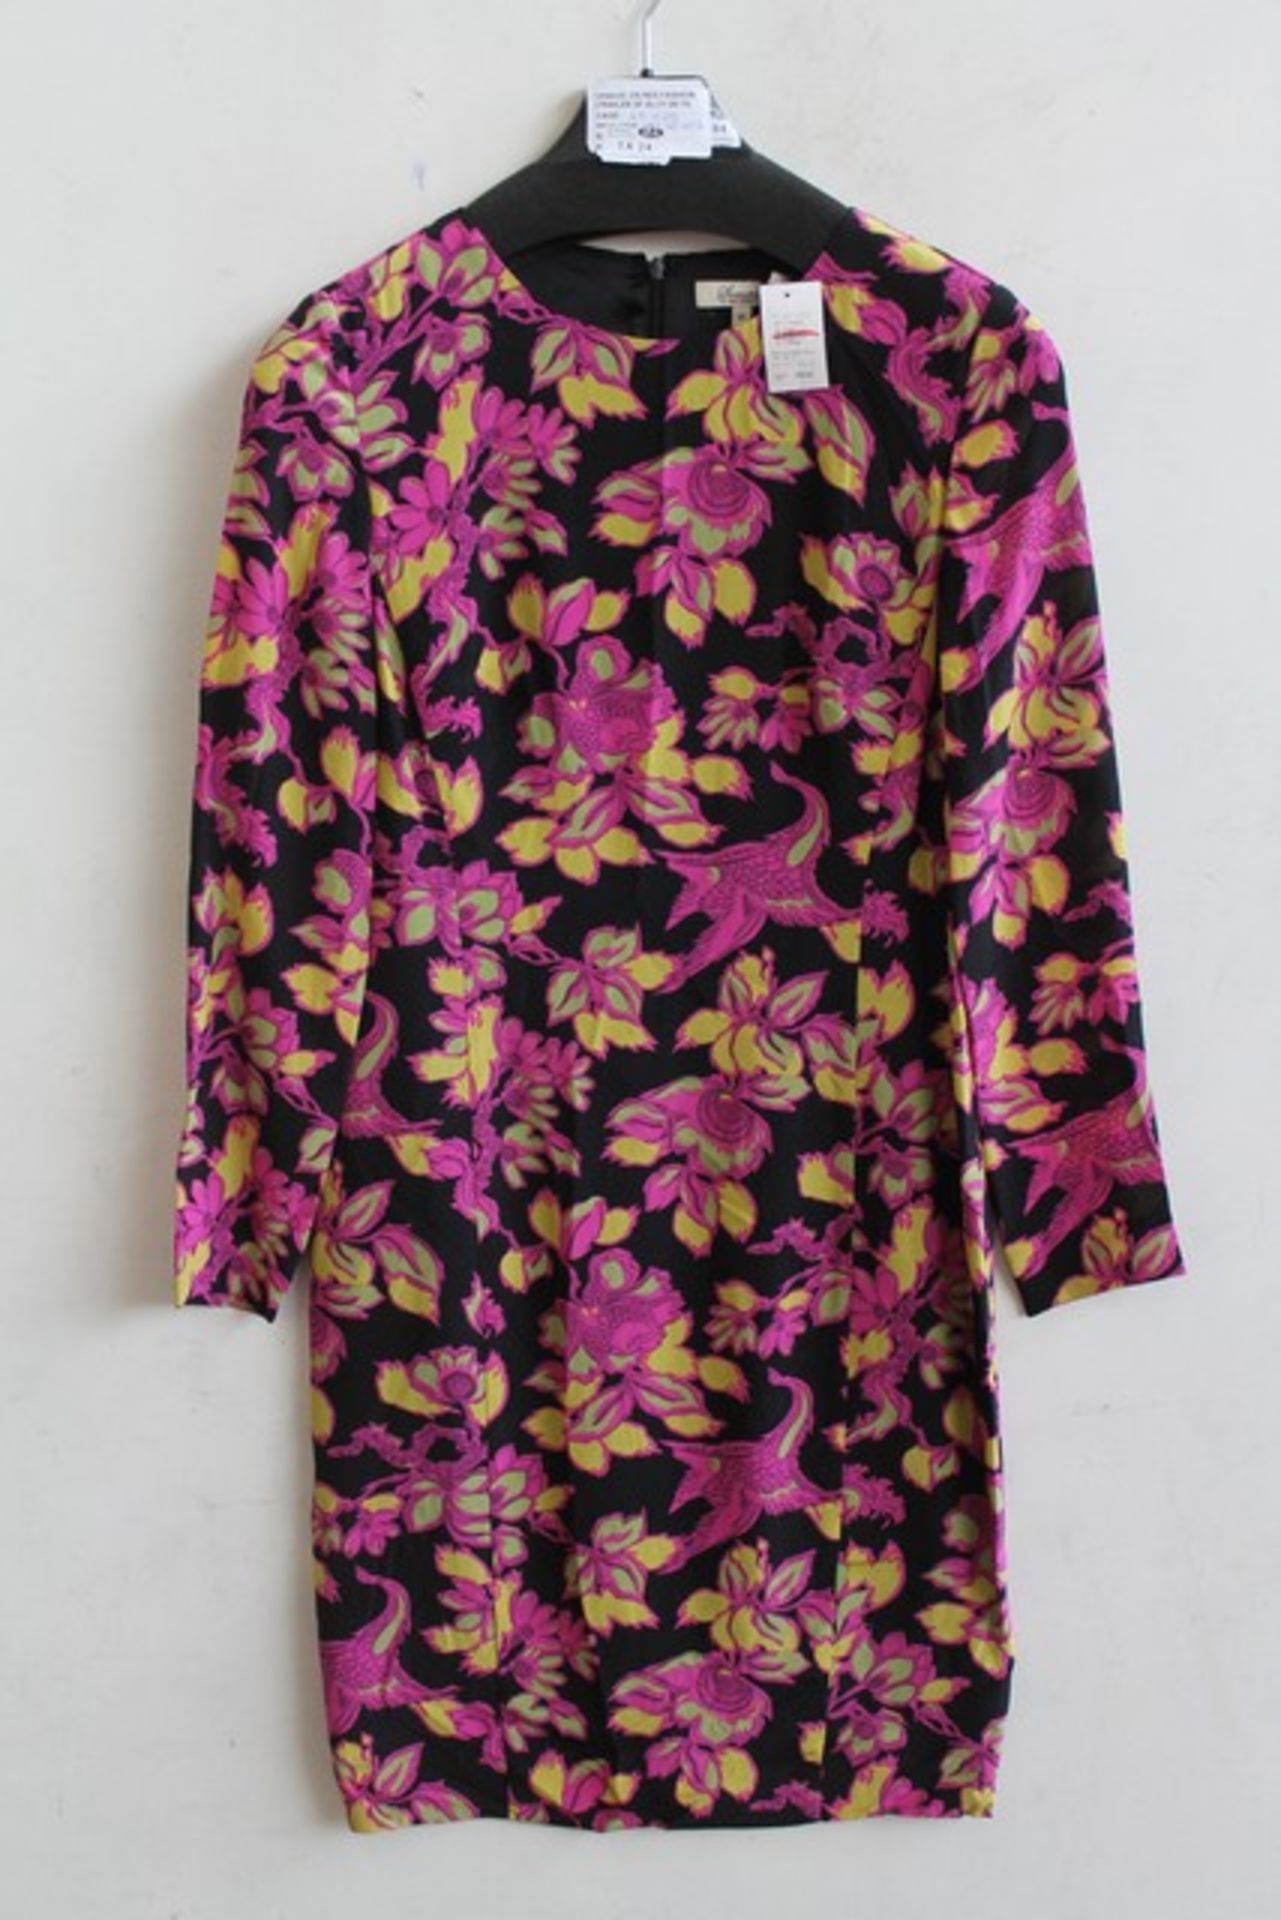 ONE BRAND NEW SOMERSET BY ALICE TEMPERLEY WINTER FLORAL SILK DRESS IN PINK SIZE 18 RRP £160 (DS